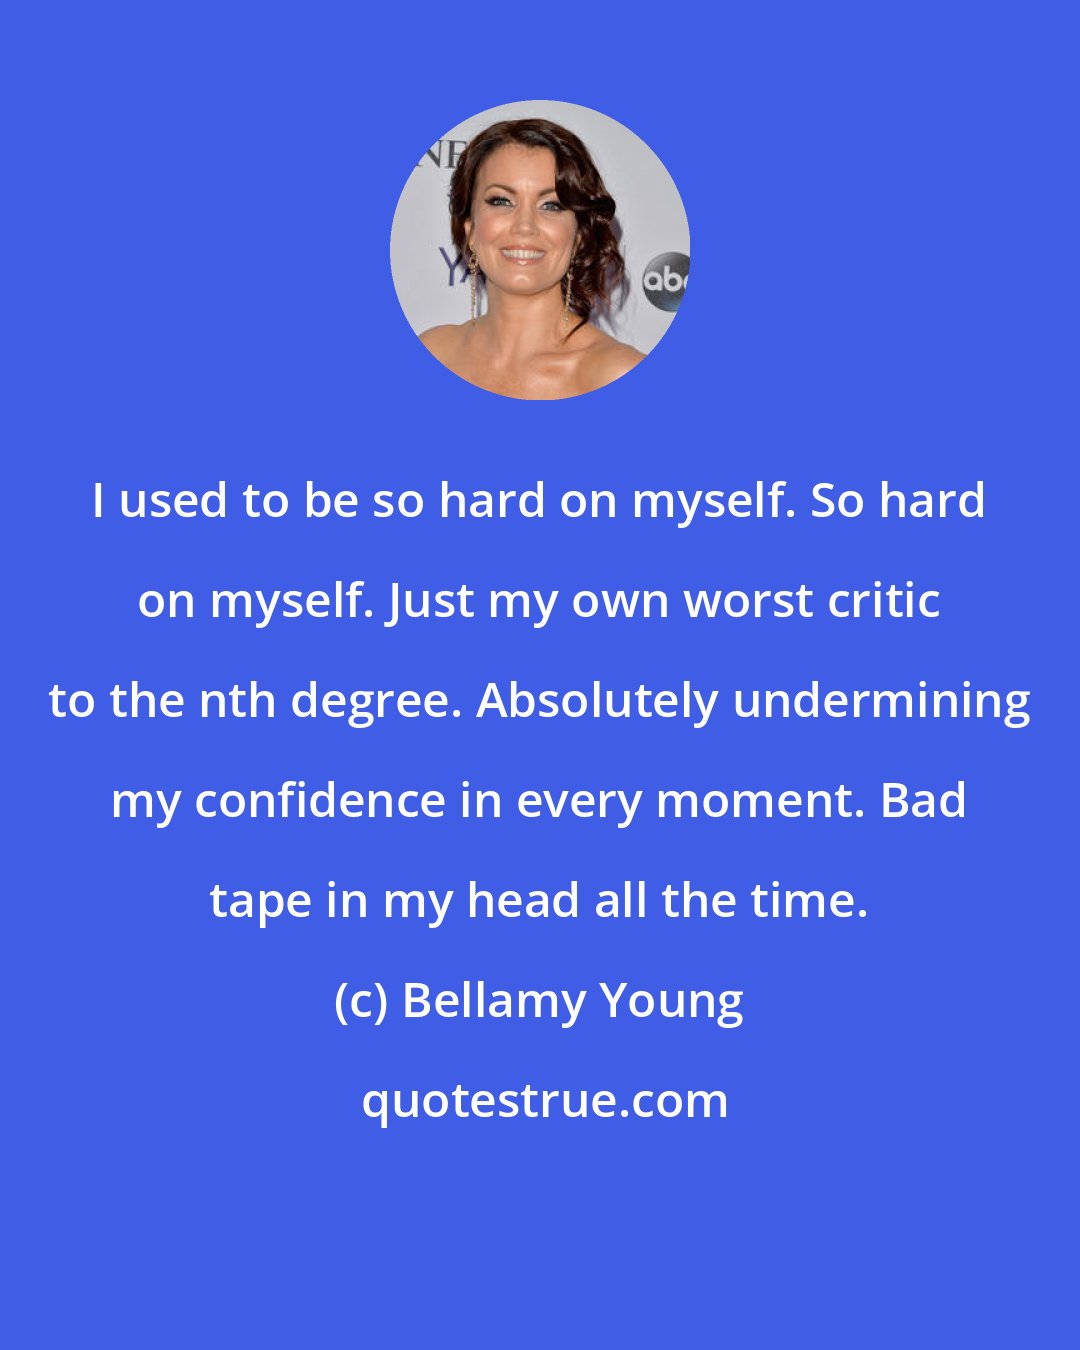 Bellamy Young: I used to be so hard on myself. So hard on myself. Just my own worst critic to the nth degree. Absolutely undermining my confidence in every moment. Bad tape in my head all the time.